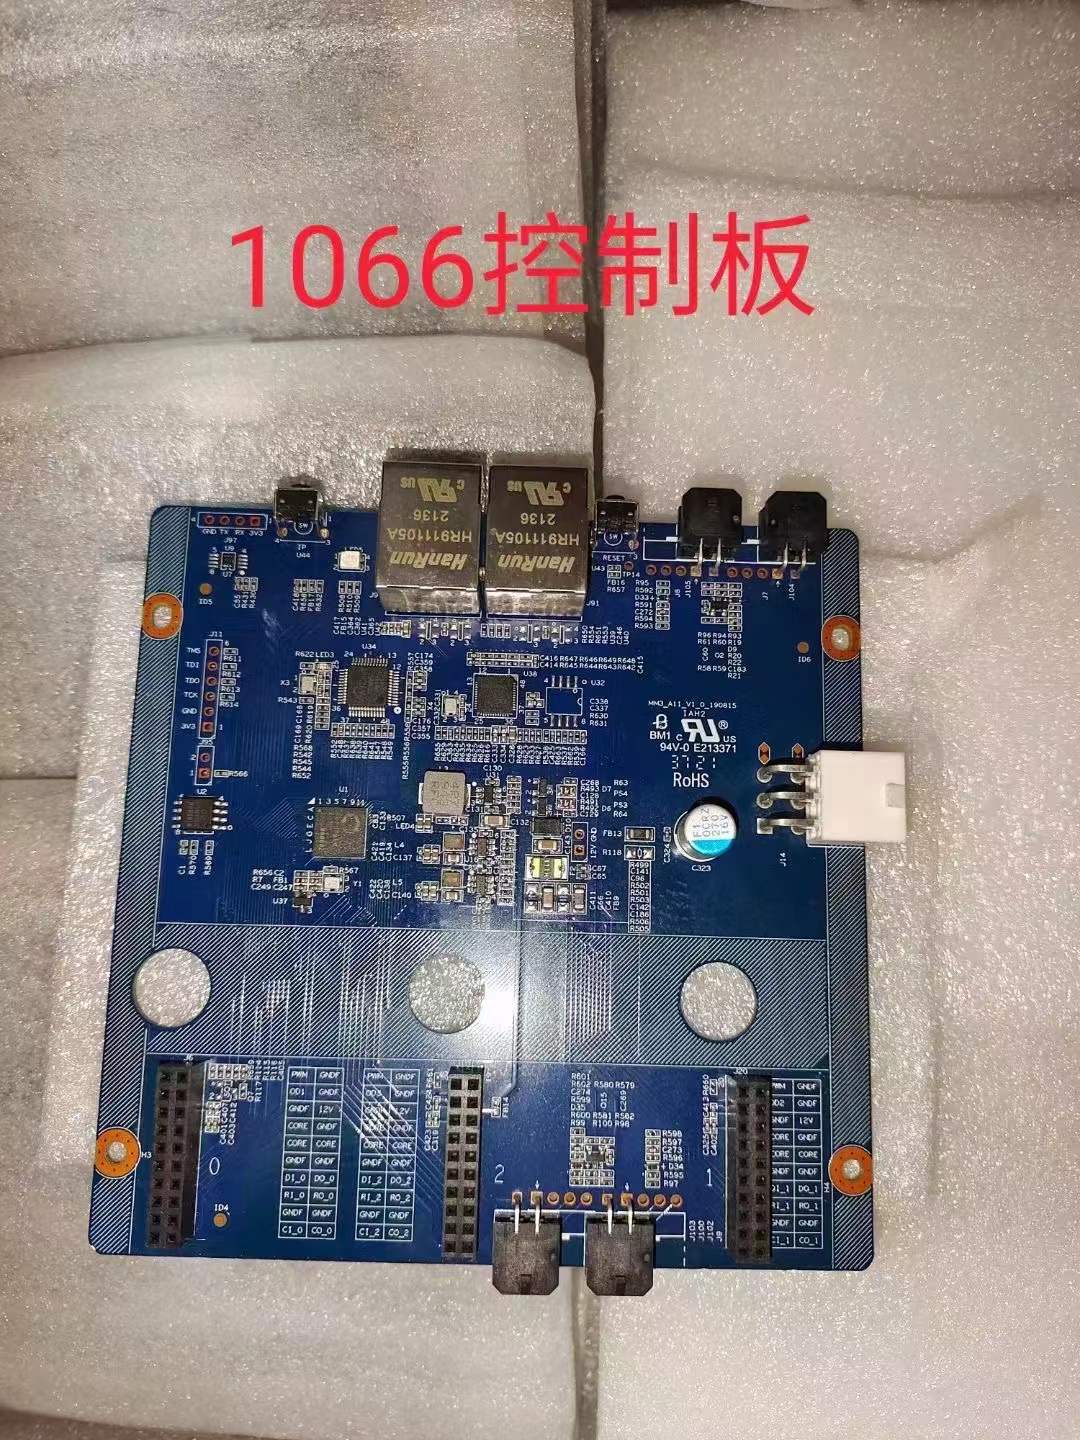 Control board for antminer A10/A10PRO